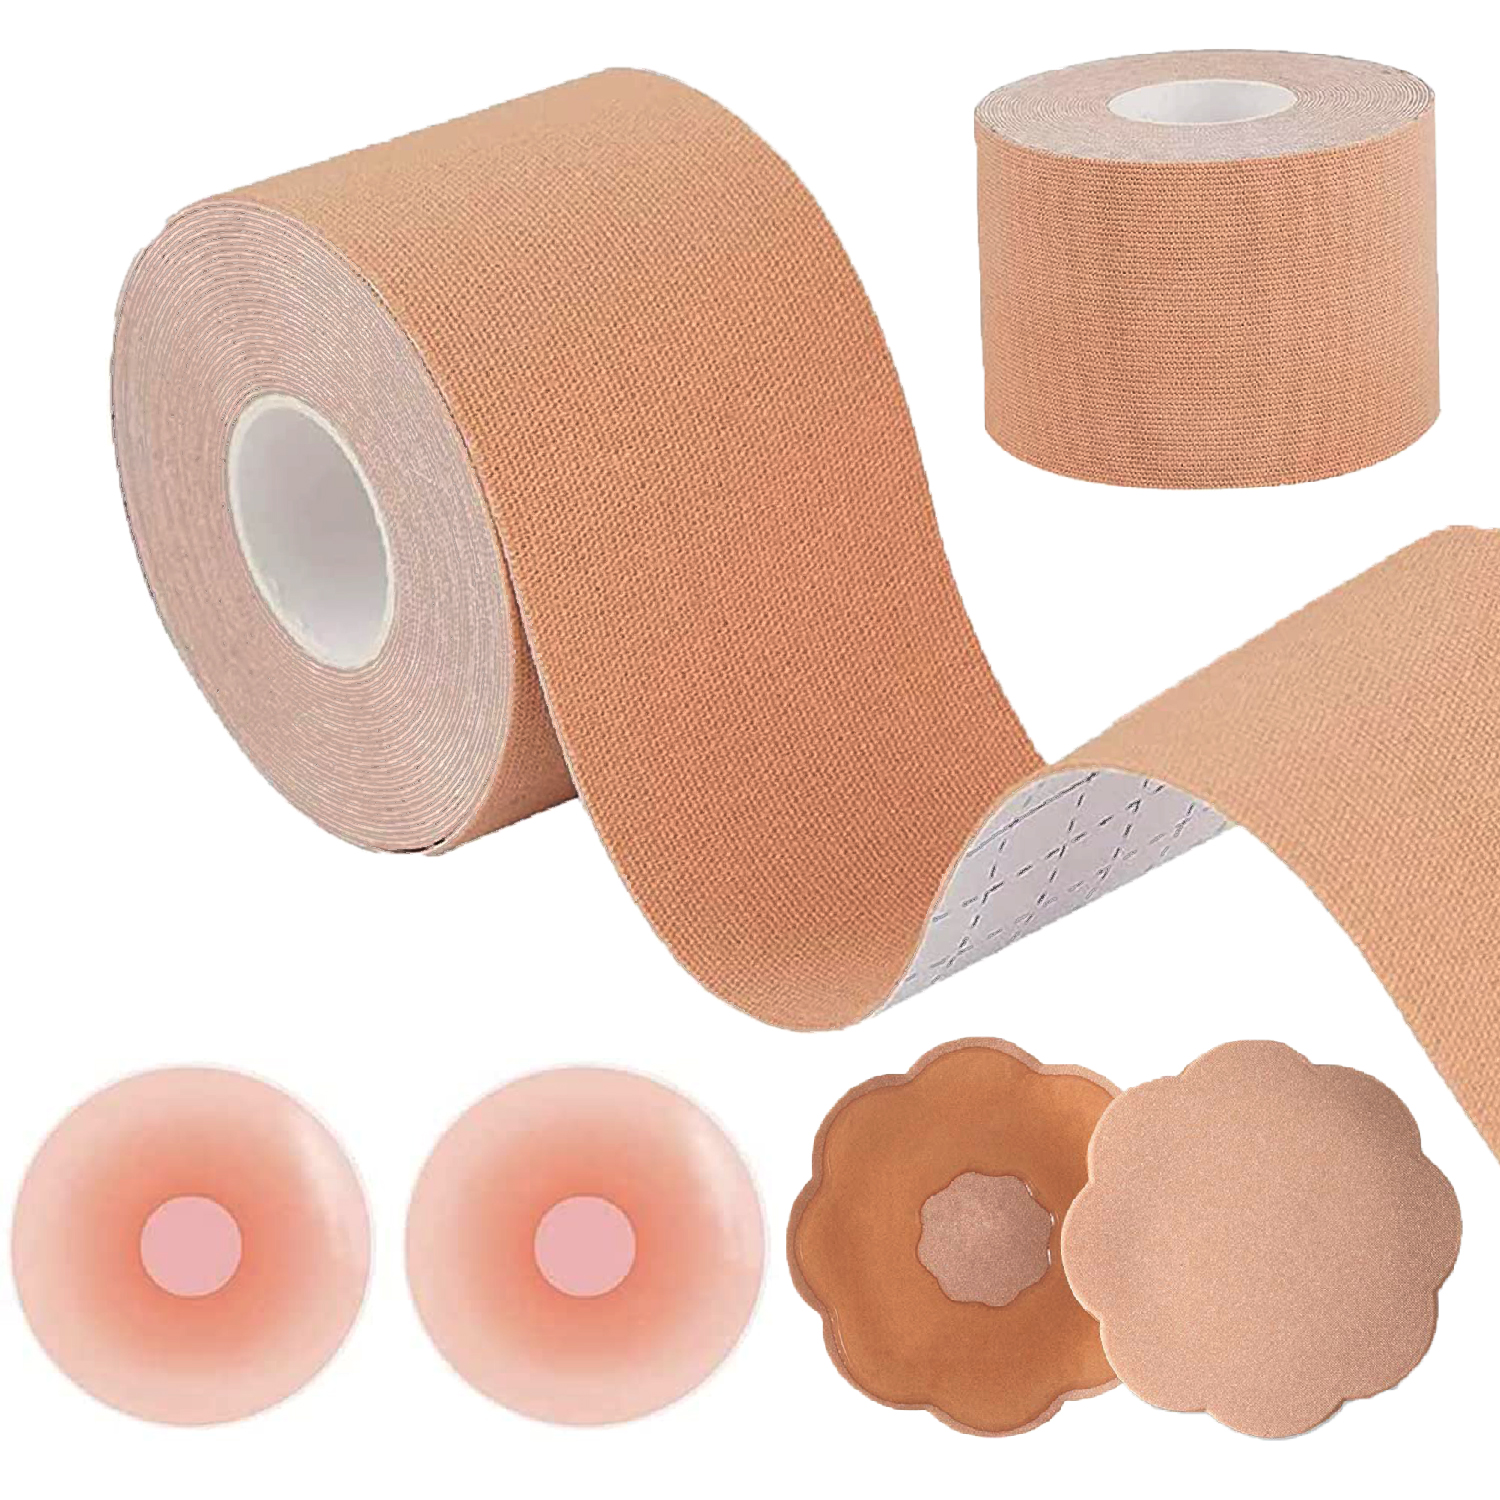 Boob Lift Tape – Instant Breast Lift Bra – Alternative of Breasts –  Adhesive Pushup Tape with Reusable Premium Silicone Nipple Covers Nude 16  ft x 2″ UPC: 023201794202 –